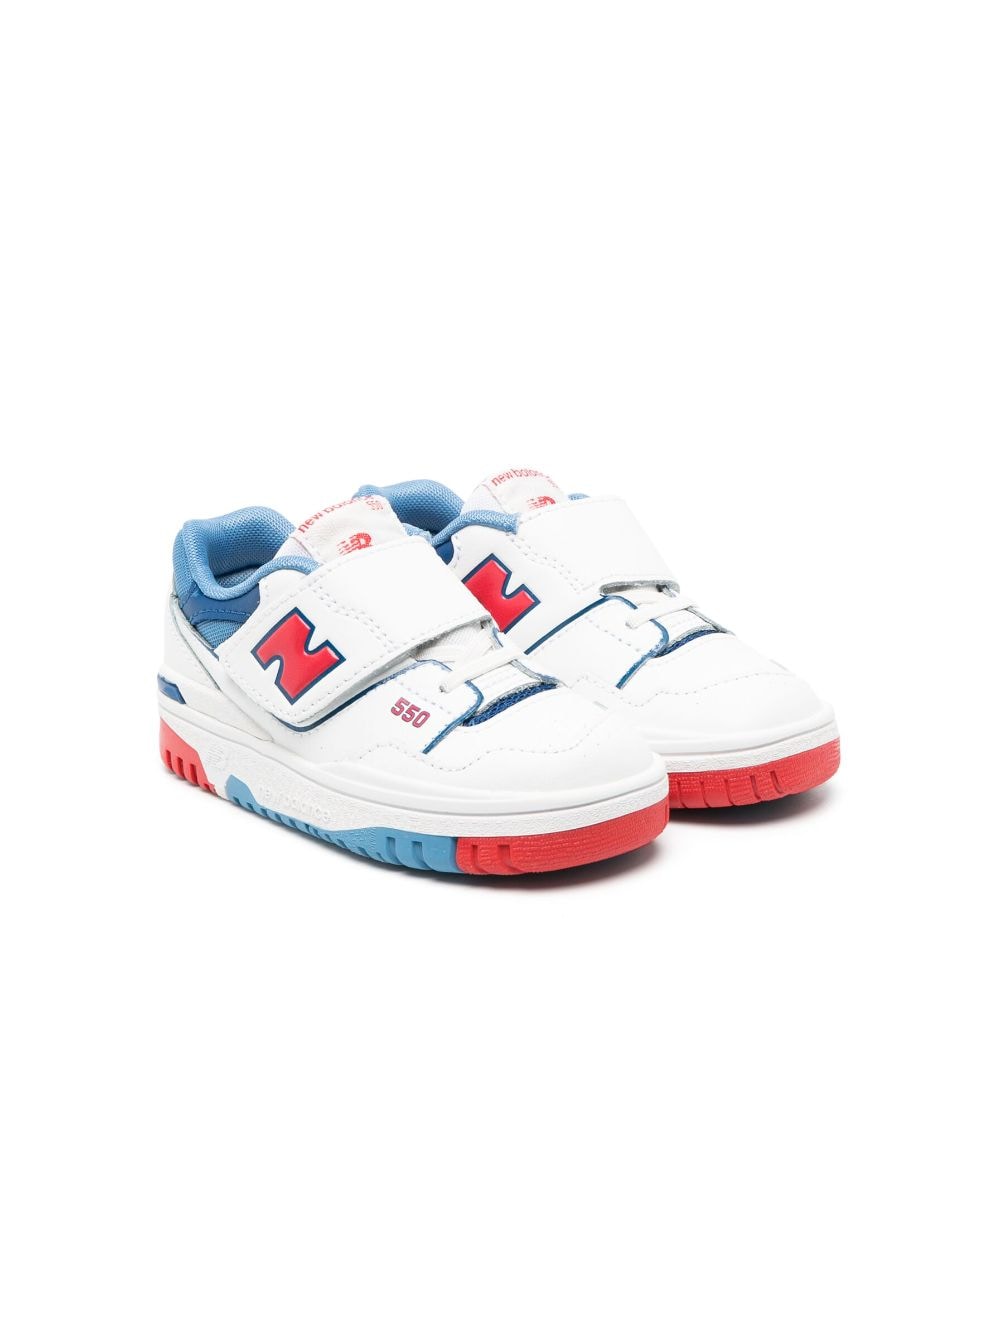 New Balance Kids 550 low-top sneakers - White